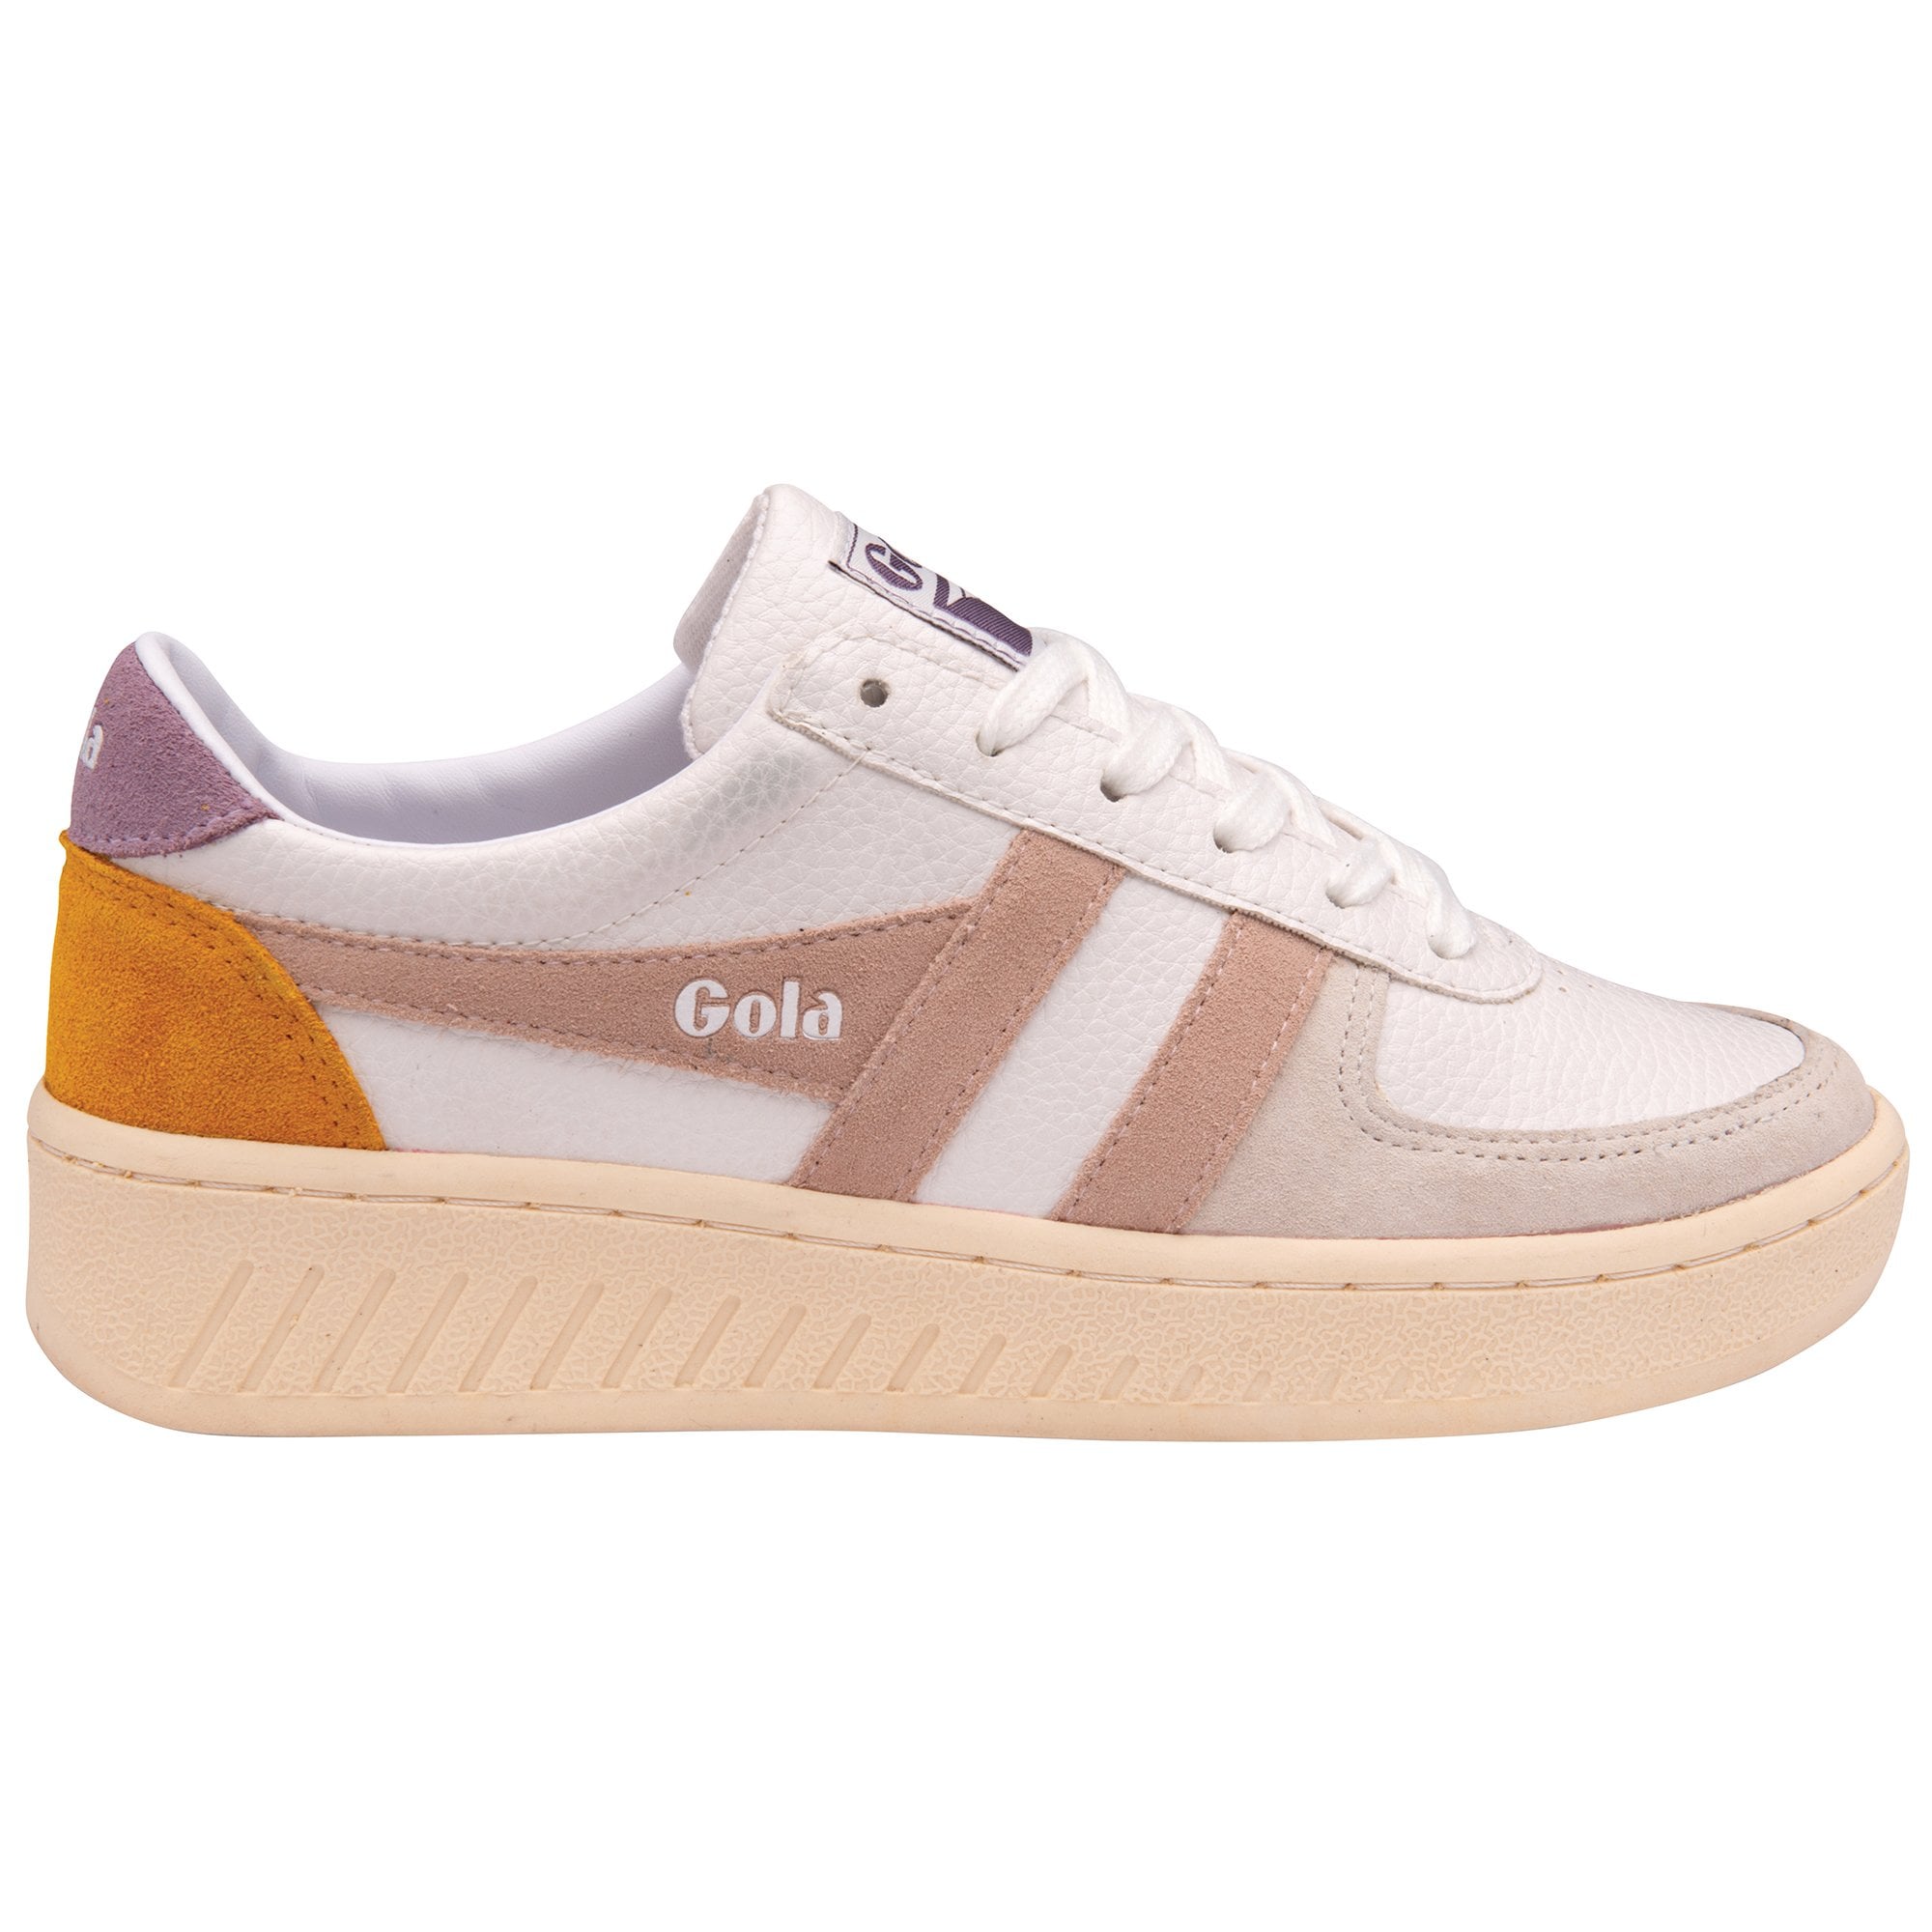 Women's Grand slam Leather Trainers, White/Blossom/Lily